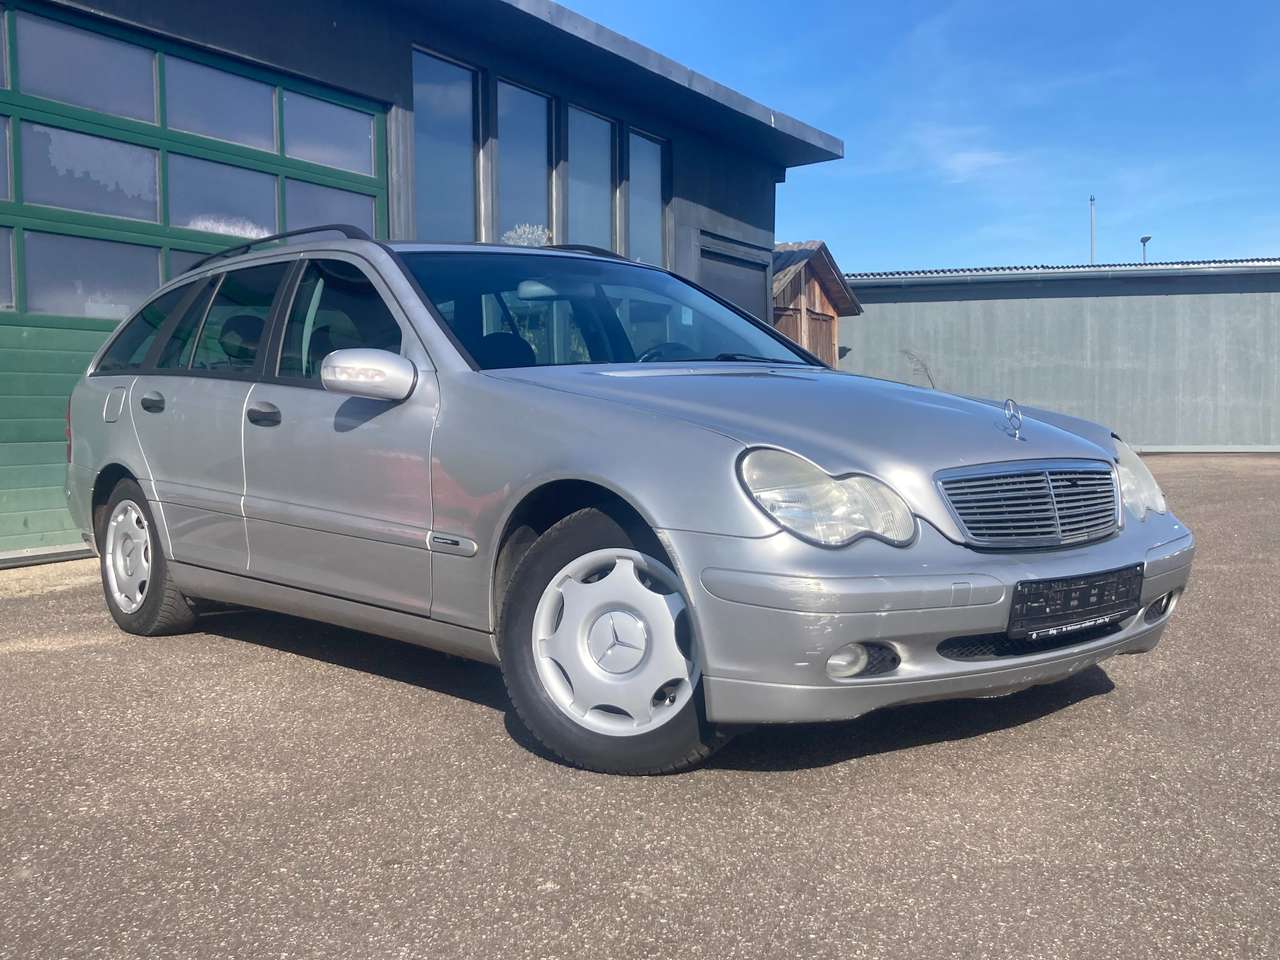 Used Mercedes Benz C-Class 220 CDI